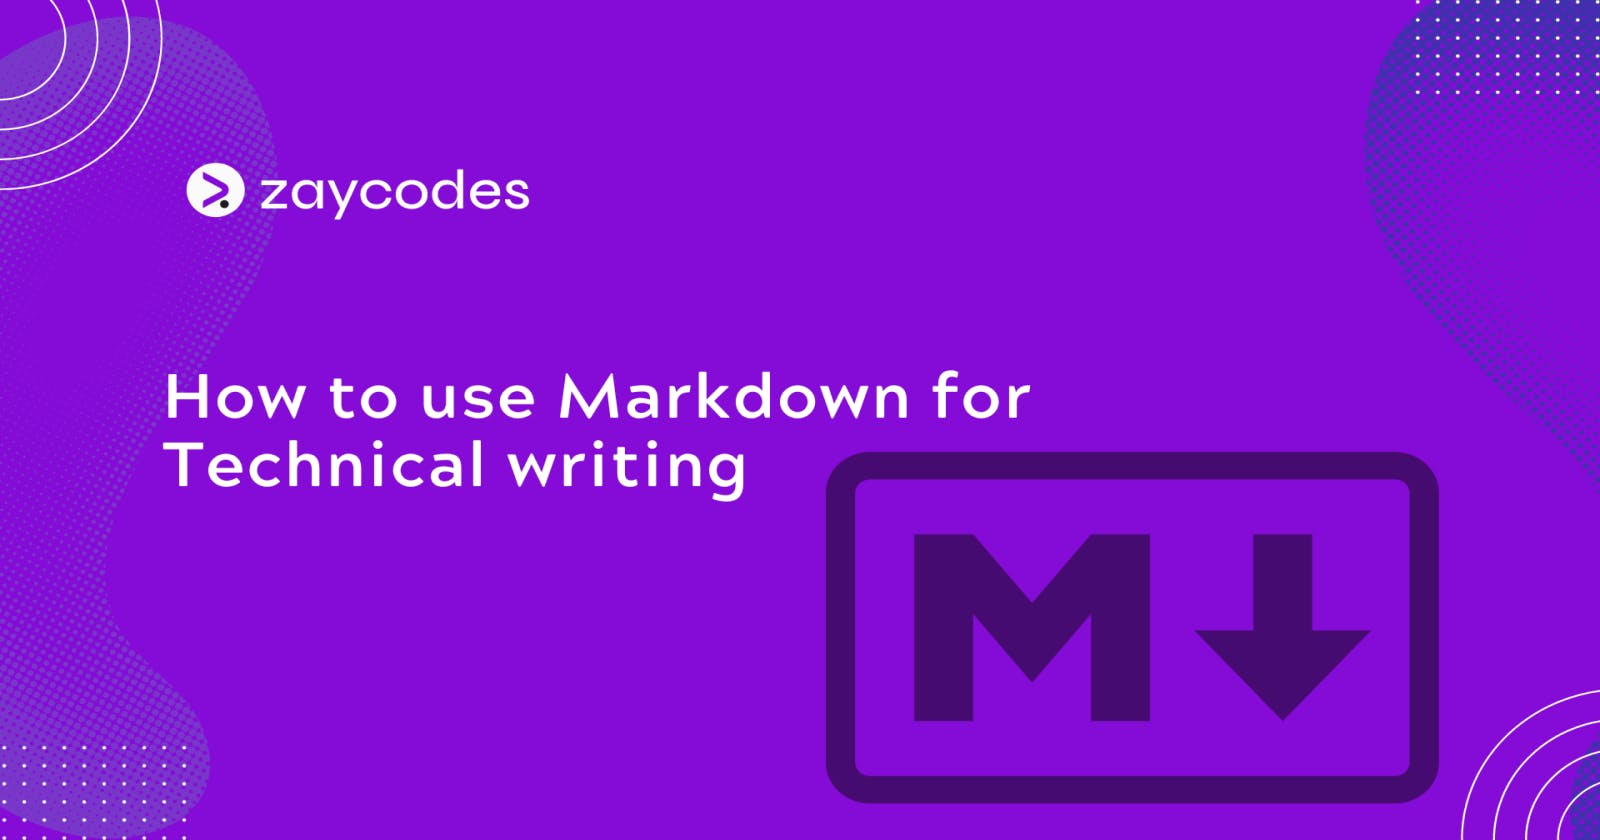 Using Markdown in Technical Writing